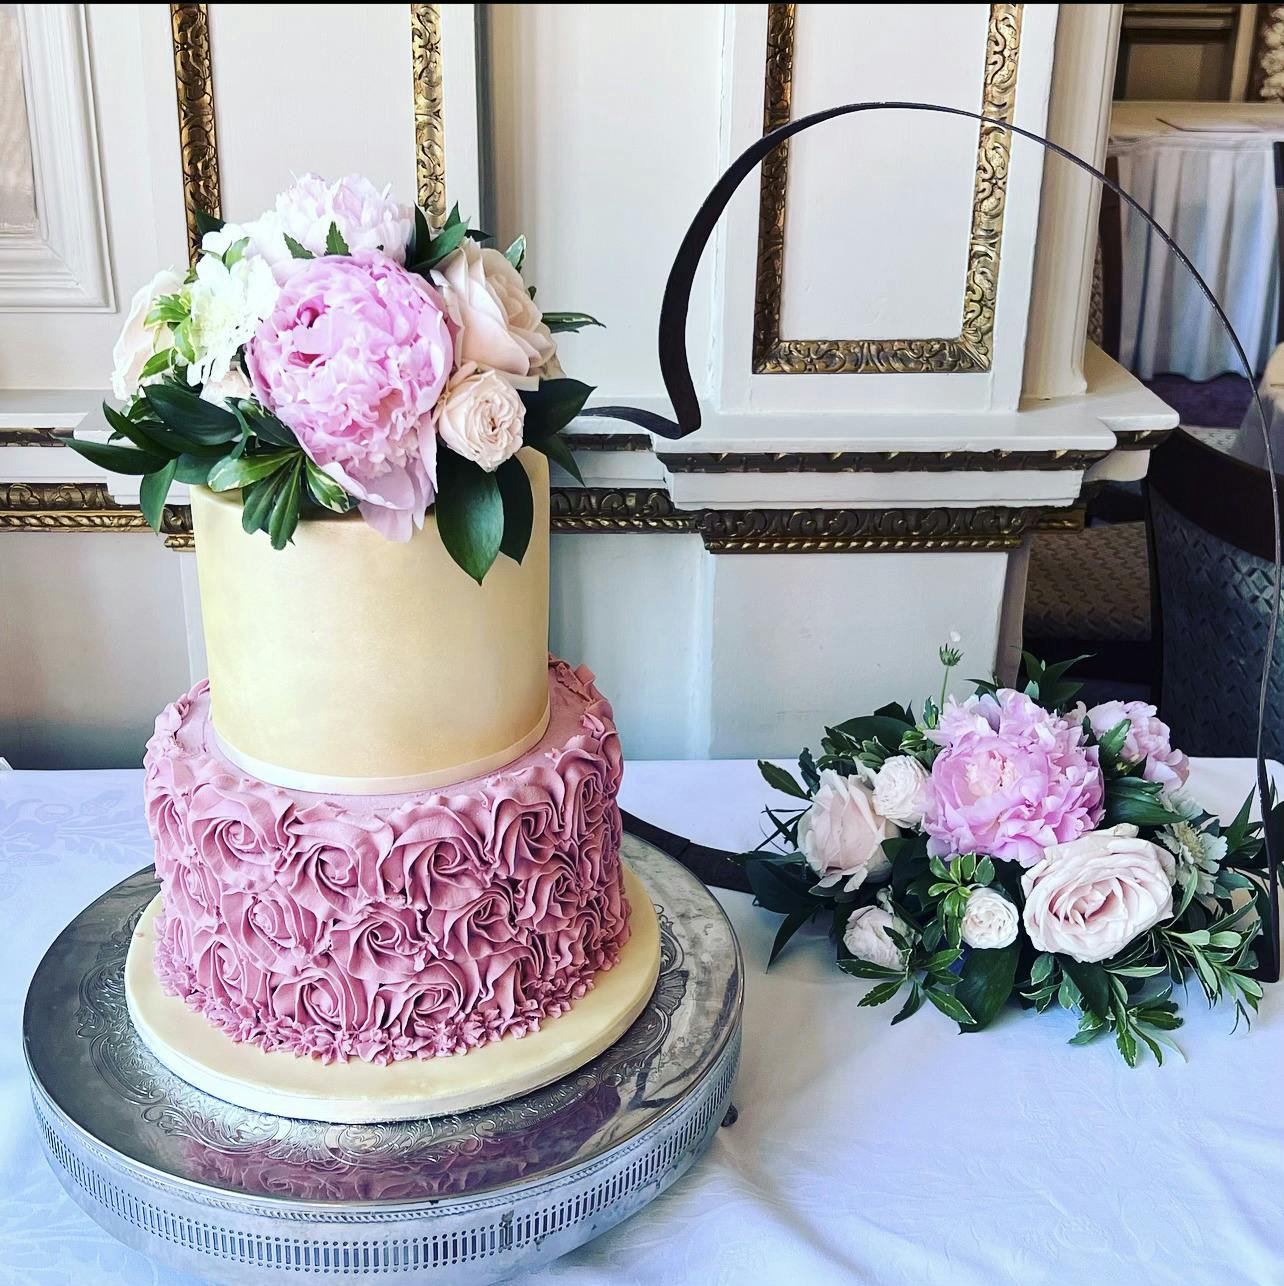 White and rose coloured two-tiered wedding cake with flowers on top